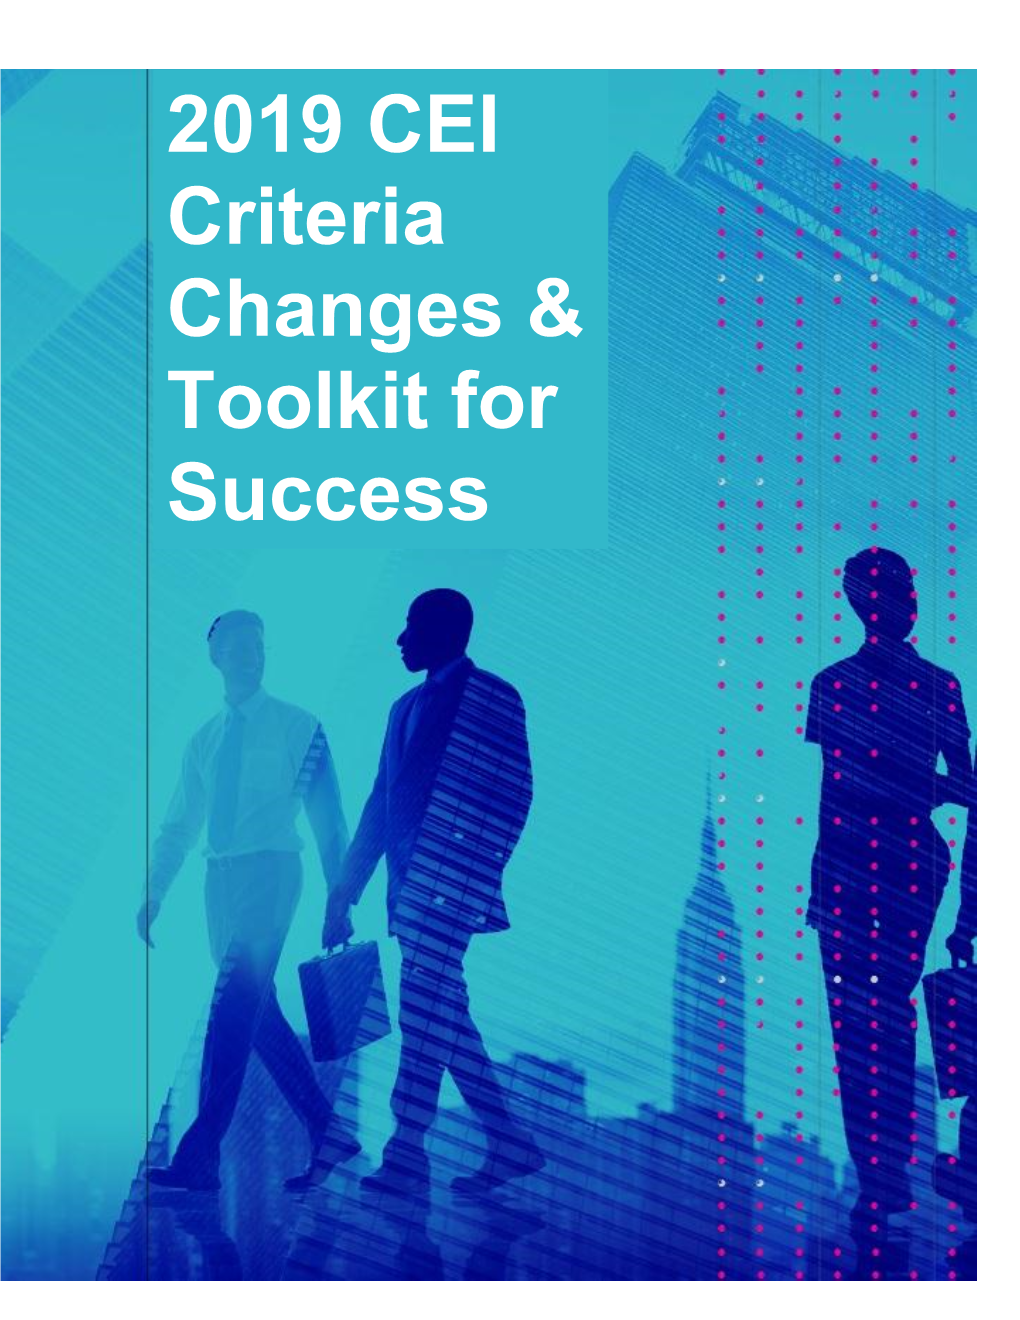 2019 CEI Criteria Changes & Toolkit for Success